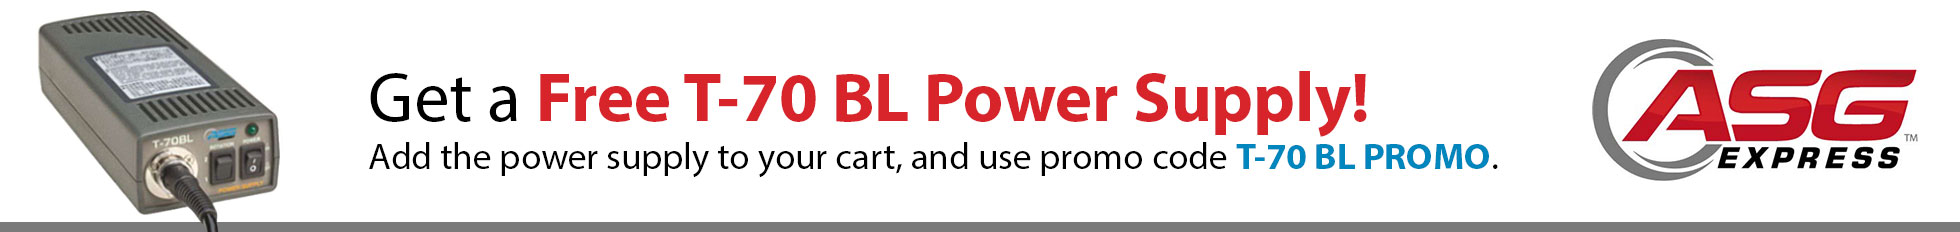 Get a free T-70 BL Power Supply when you buy this ASG Torque Driver